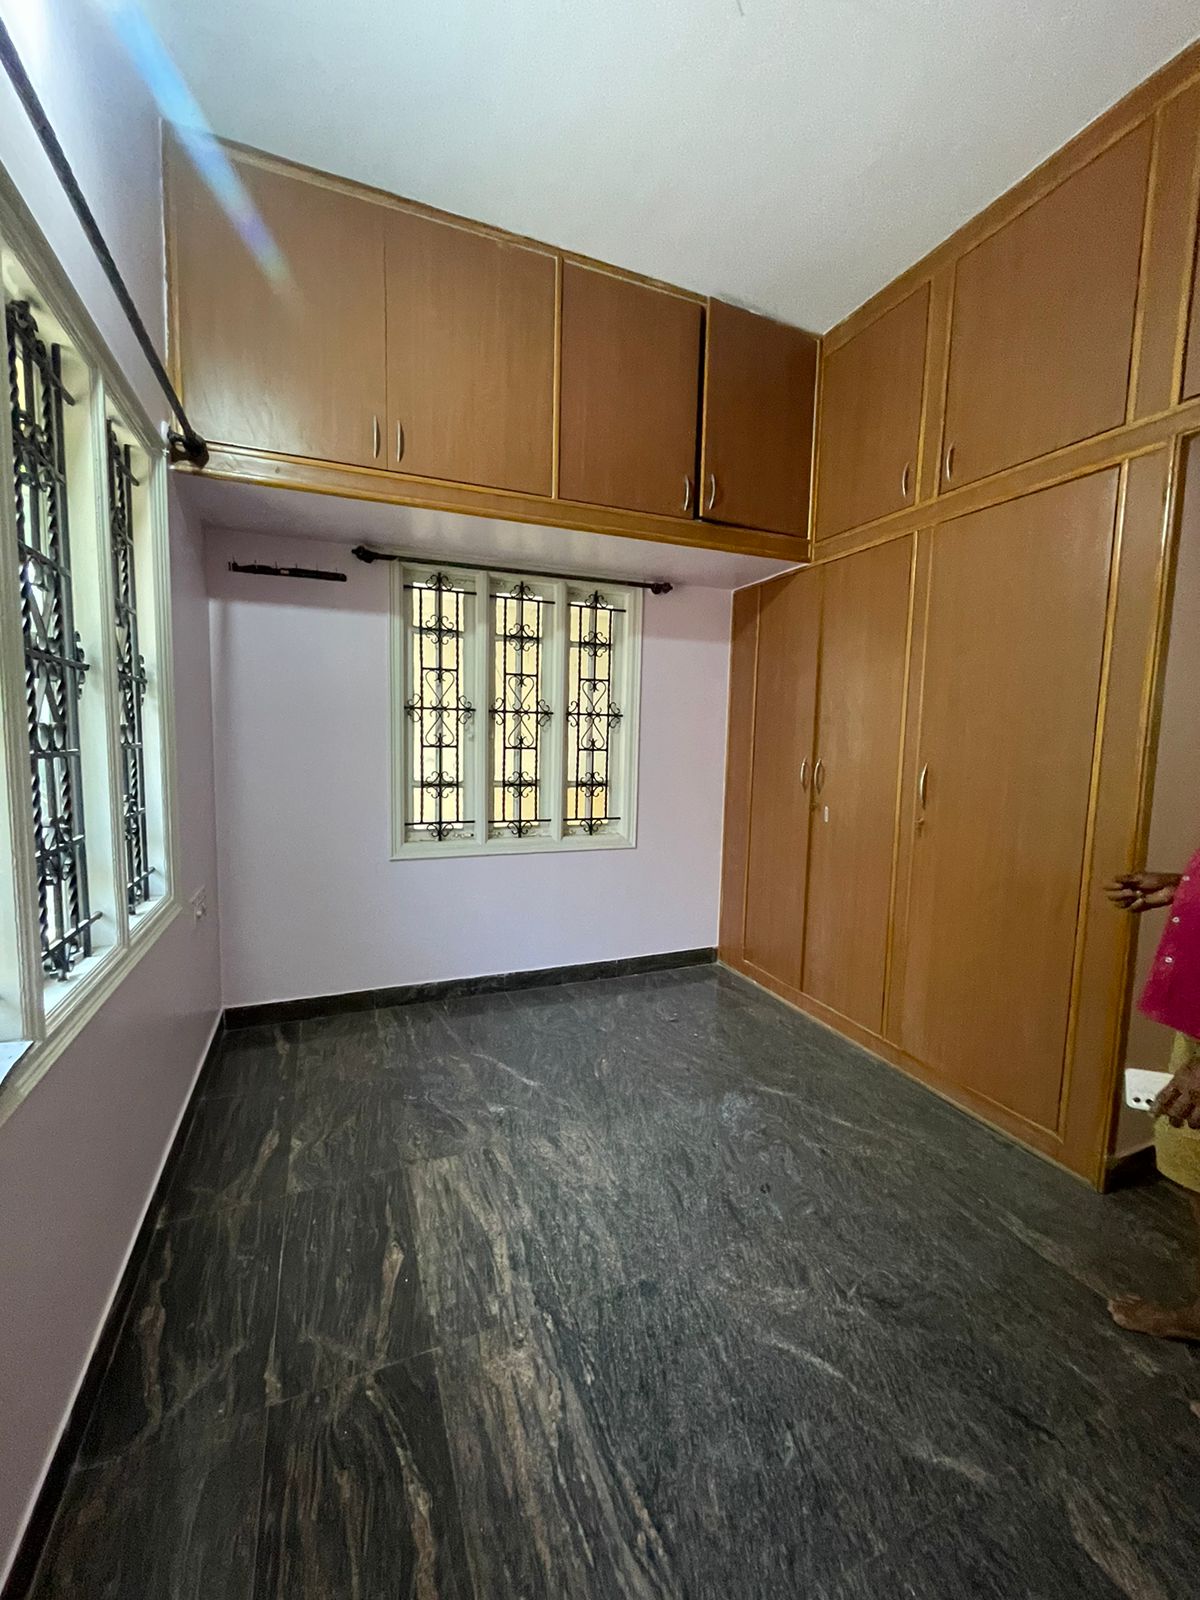 2 BHK Independent House for Lease Only at JAML2 - 4320 in Ganakal